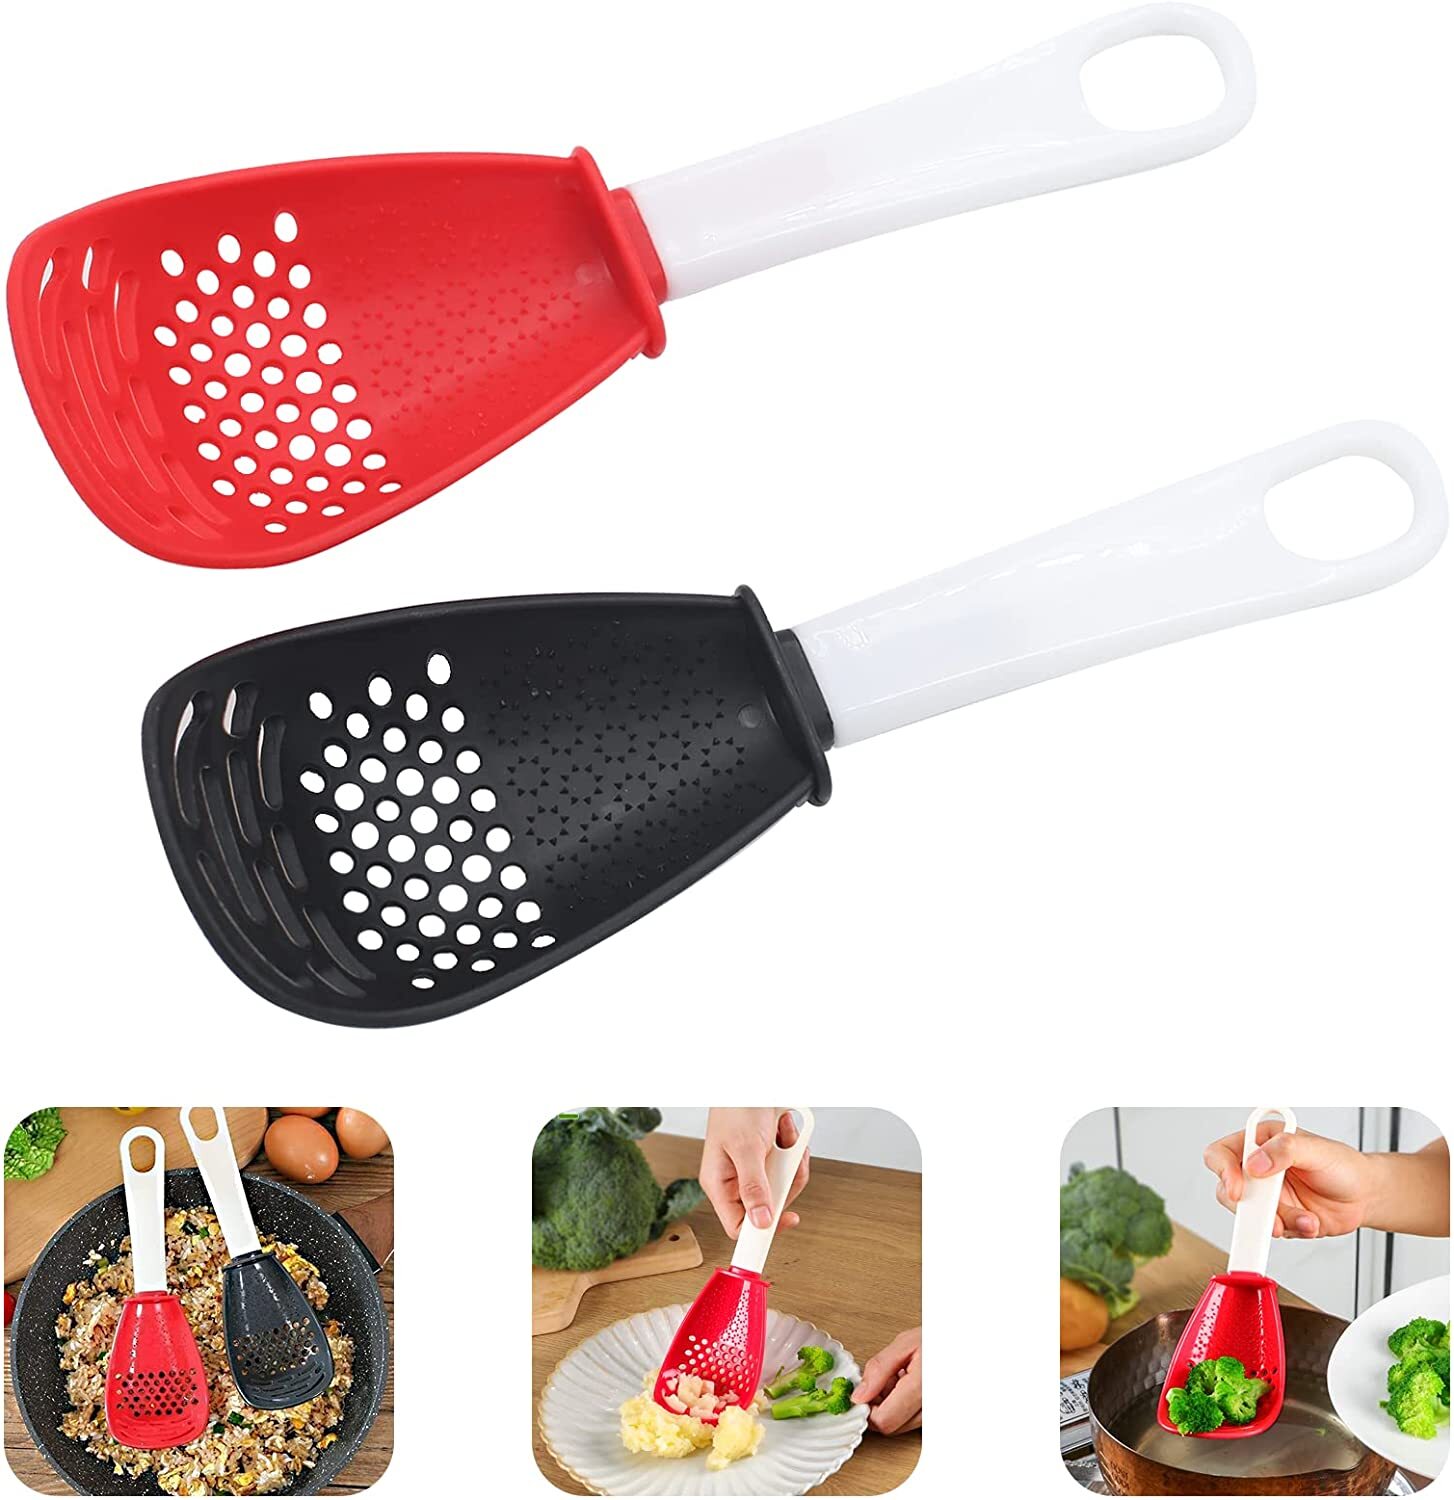 Multifunction Cooking Spoon All-In-One Kitchen Utensil Tool (Black)